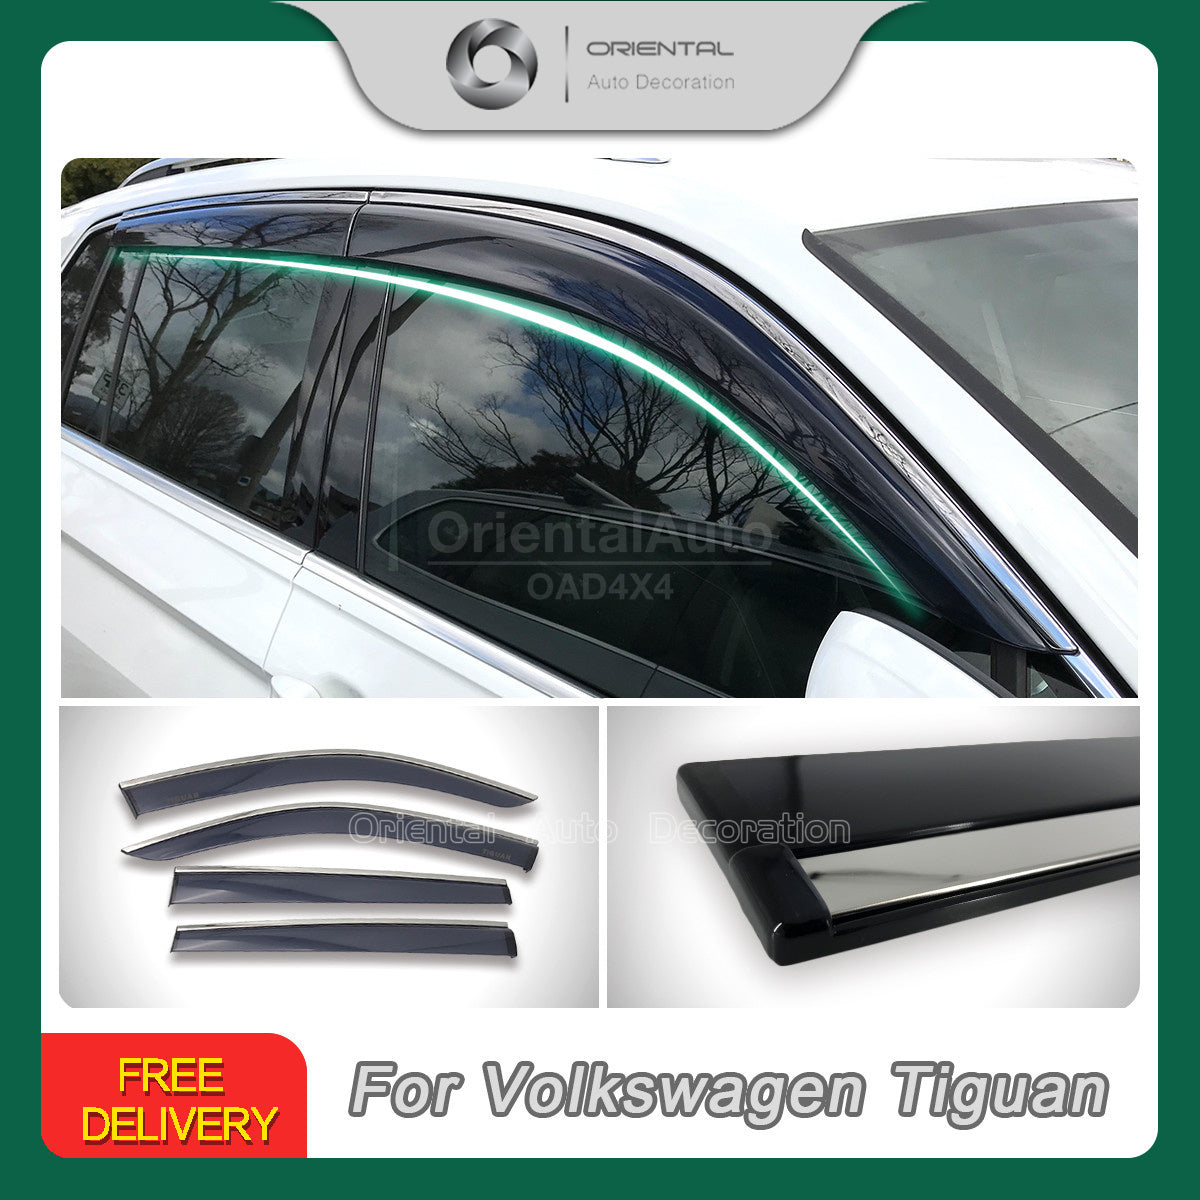 Injection Stainless Weathershields For Volkswagen Tiguan 2016+ Weather Shields Window Visor